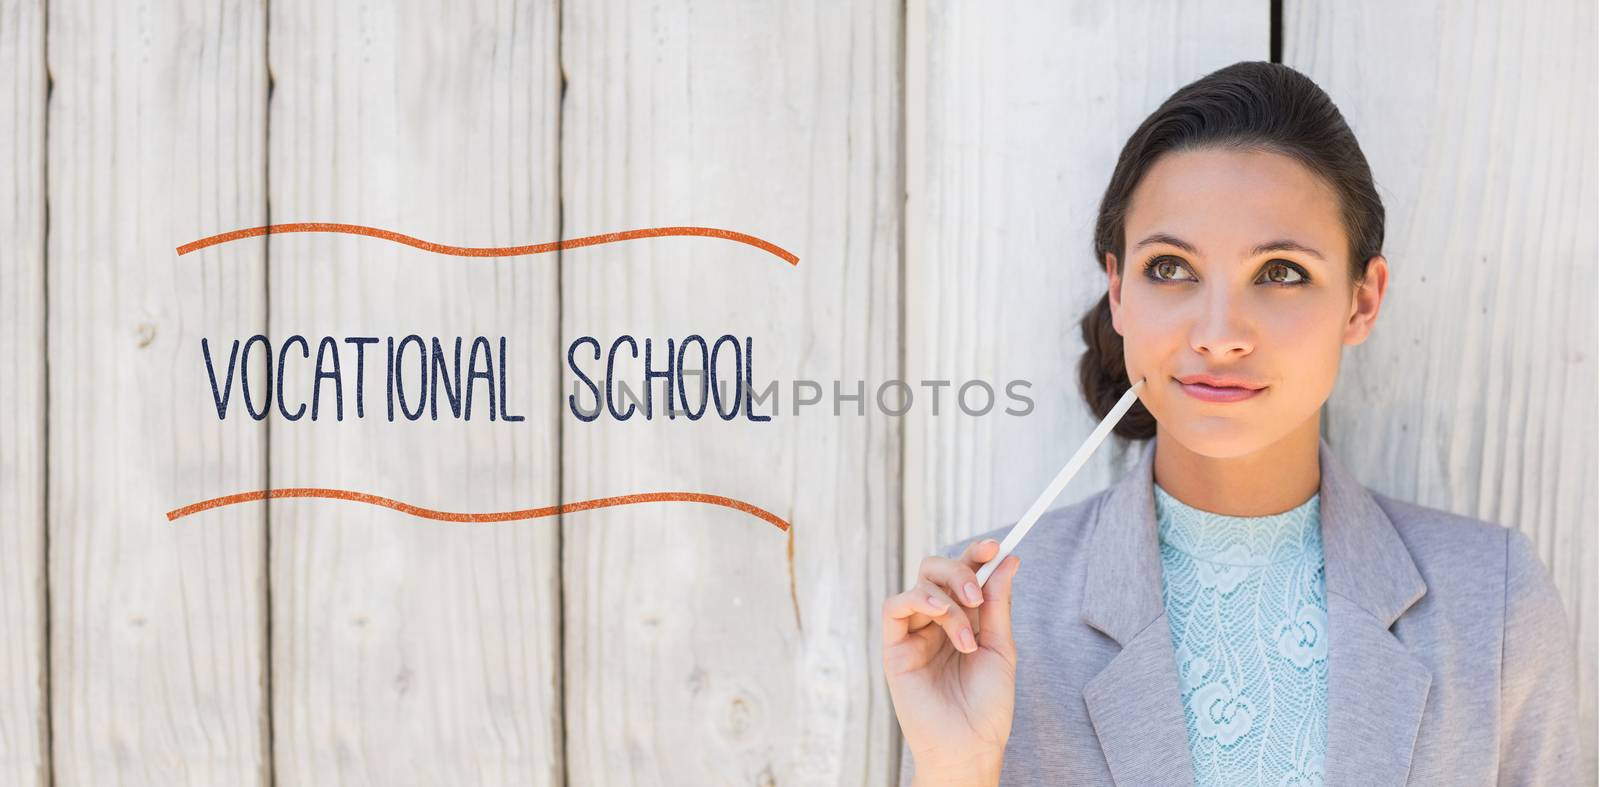 The word vocational school against stylish brunette thinking and smiling